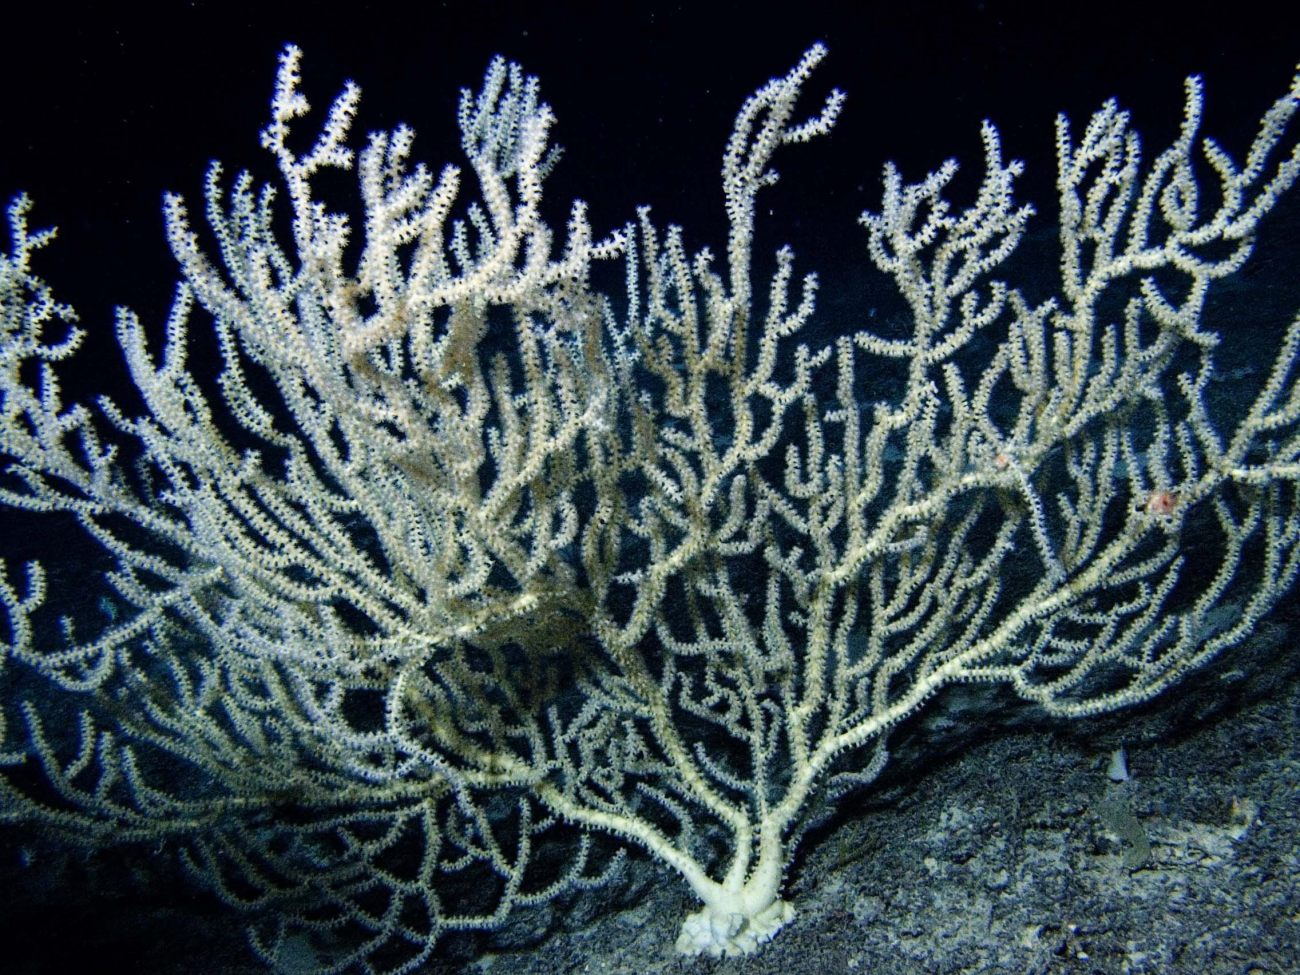 This was the largest colony of white bamboo coral (Keratoisis flexibilis)observed on the expedition